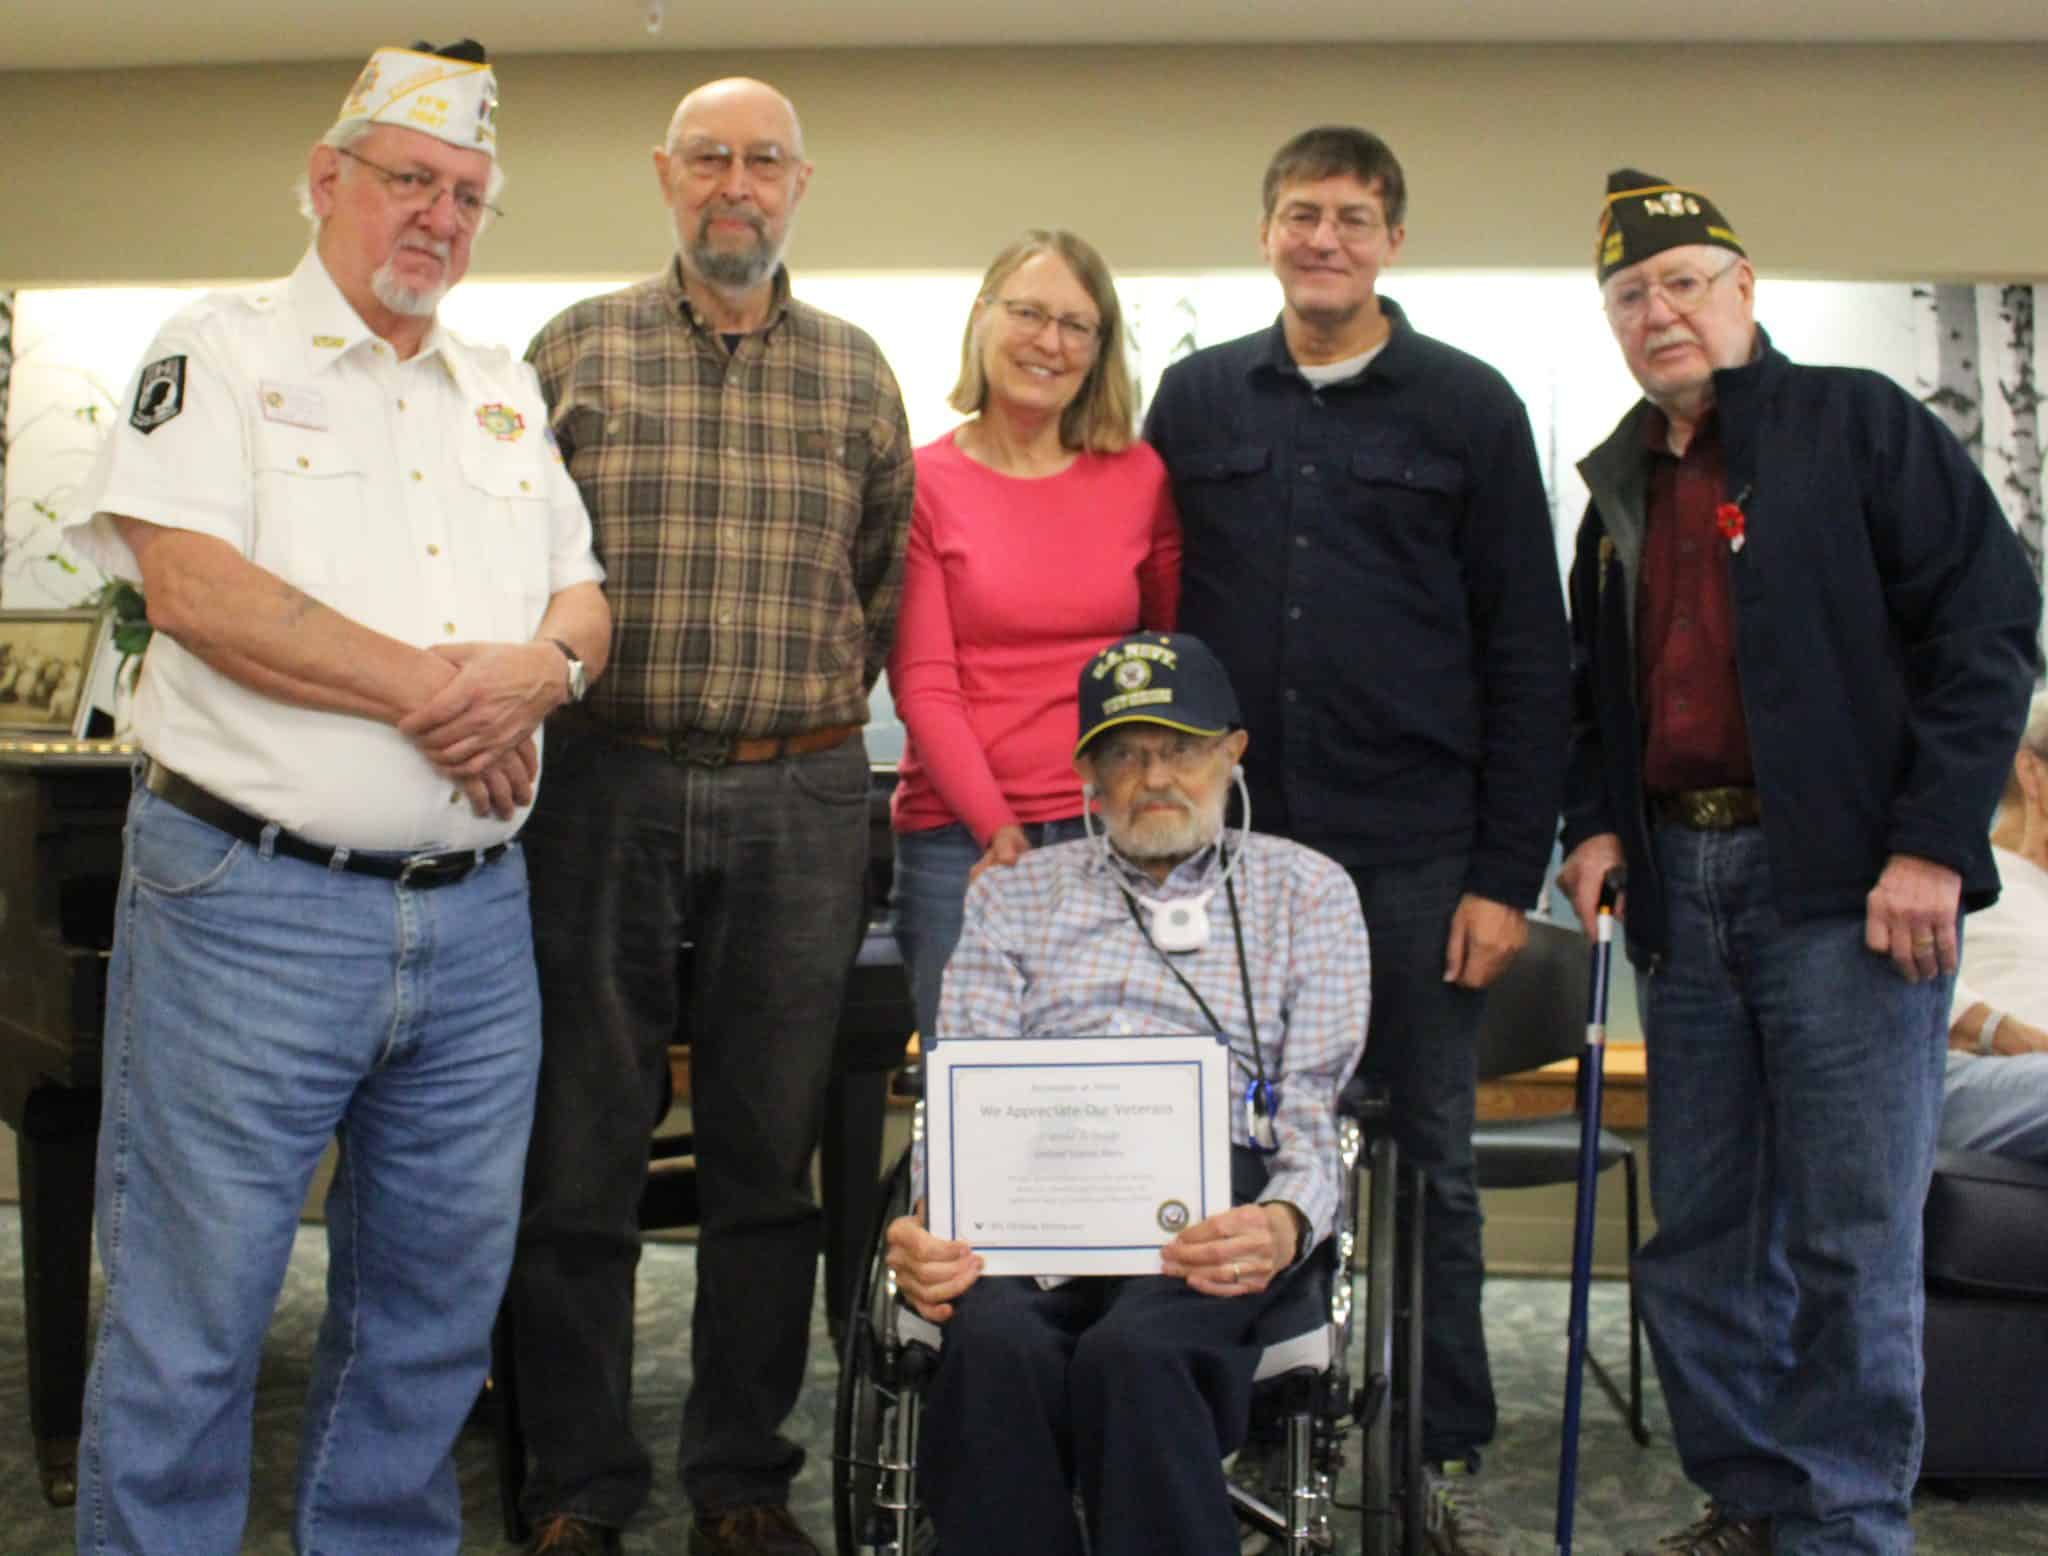 WWII veteran Hal Schrage honored for service to country during special ceremony at Milestone Oct. 18